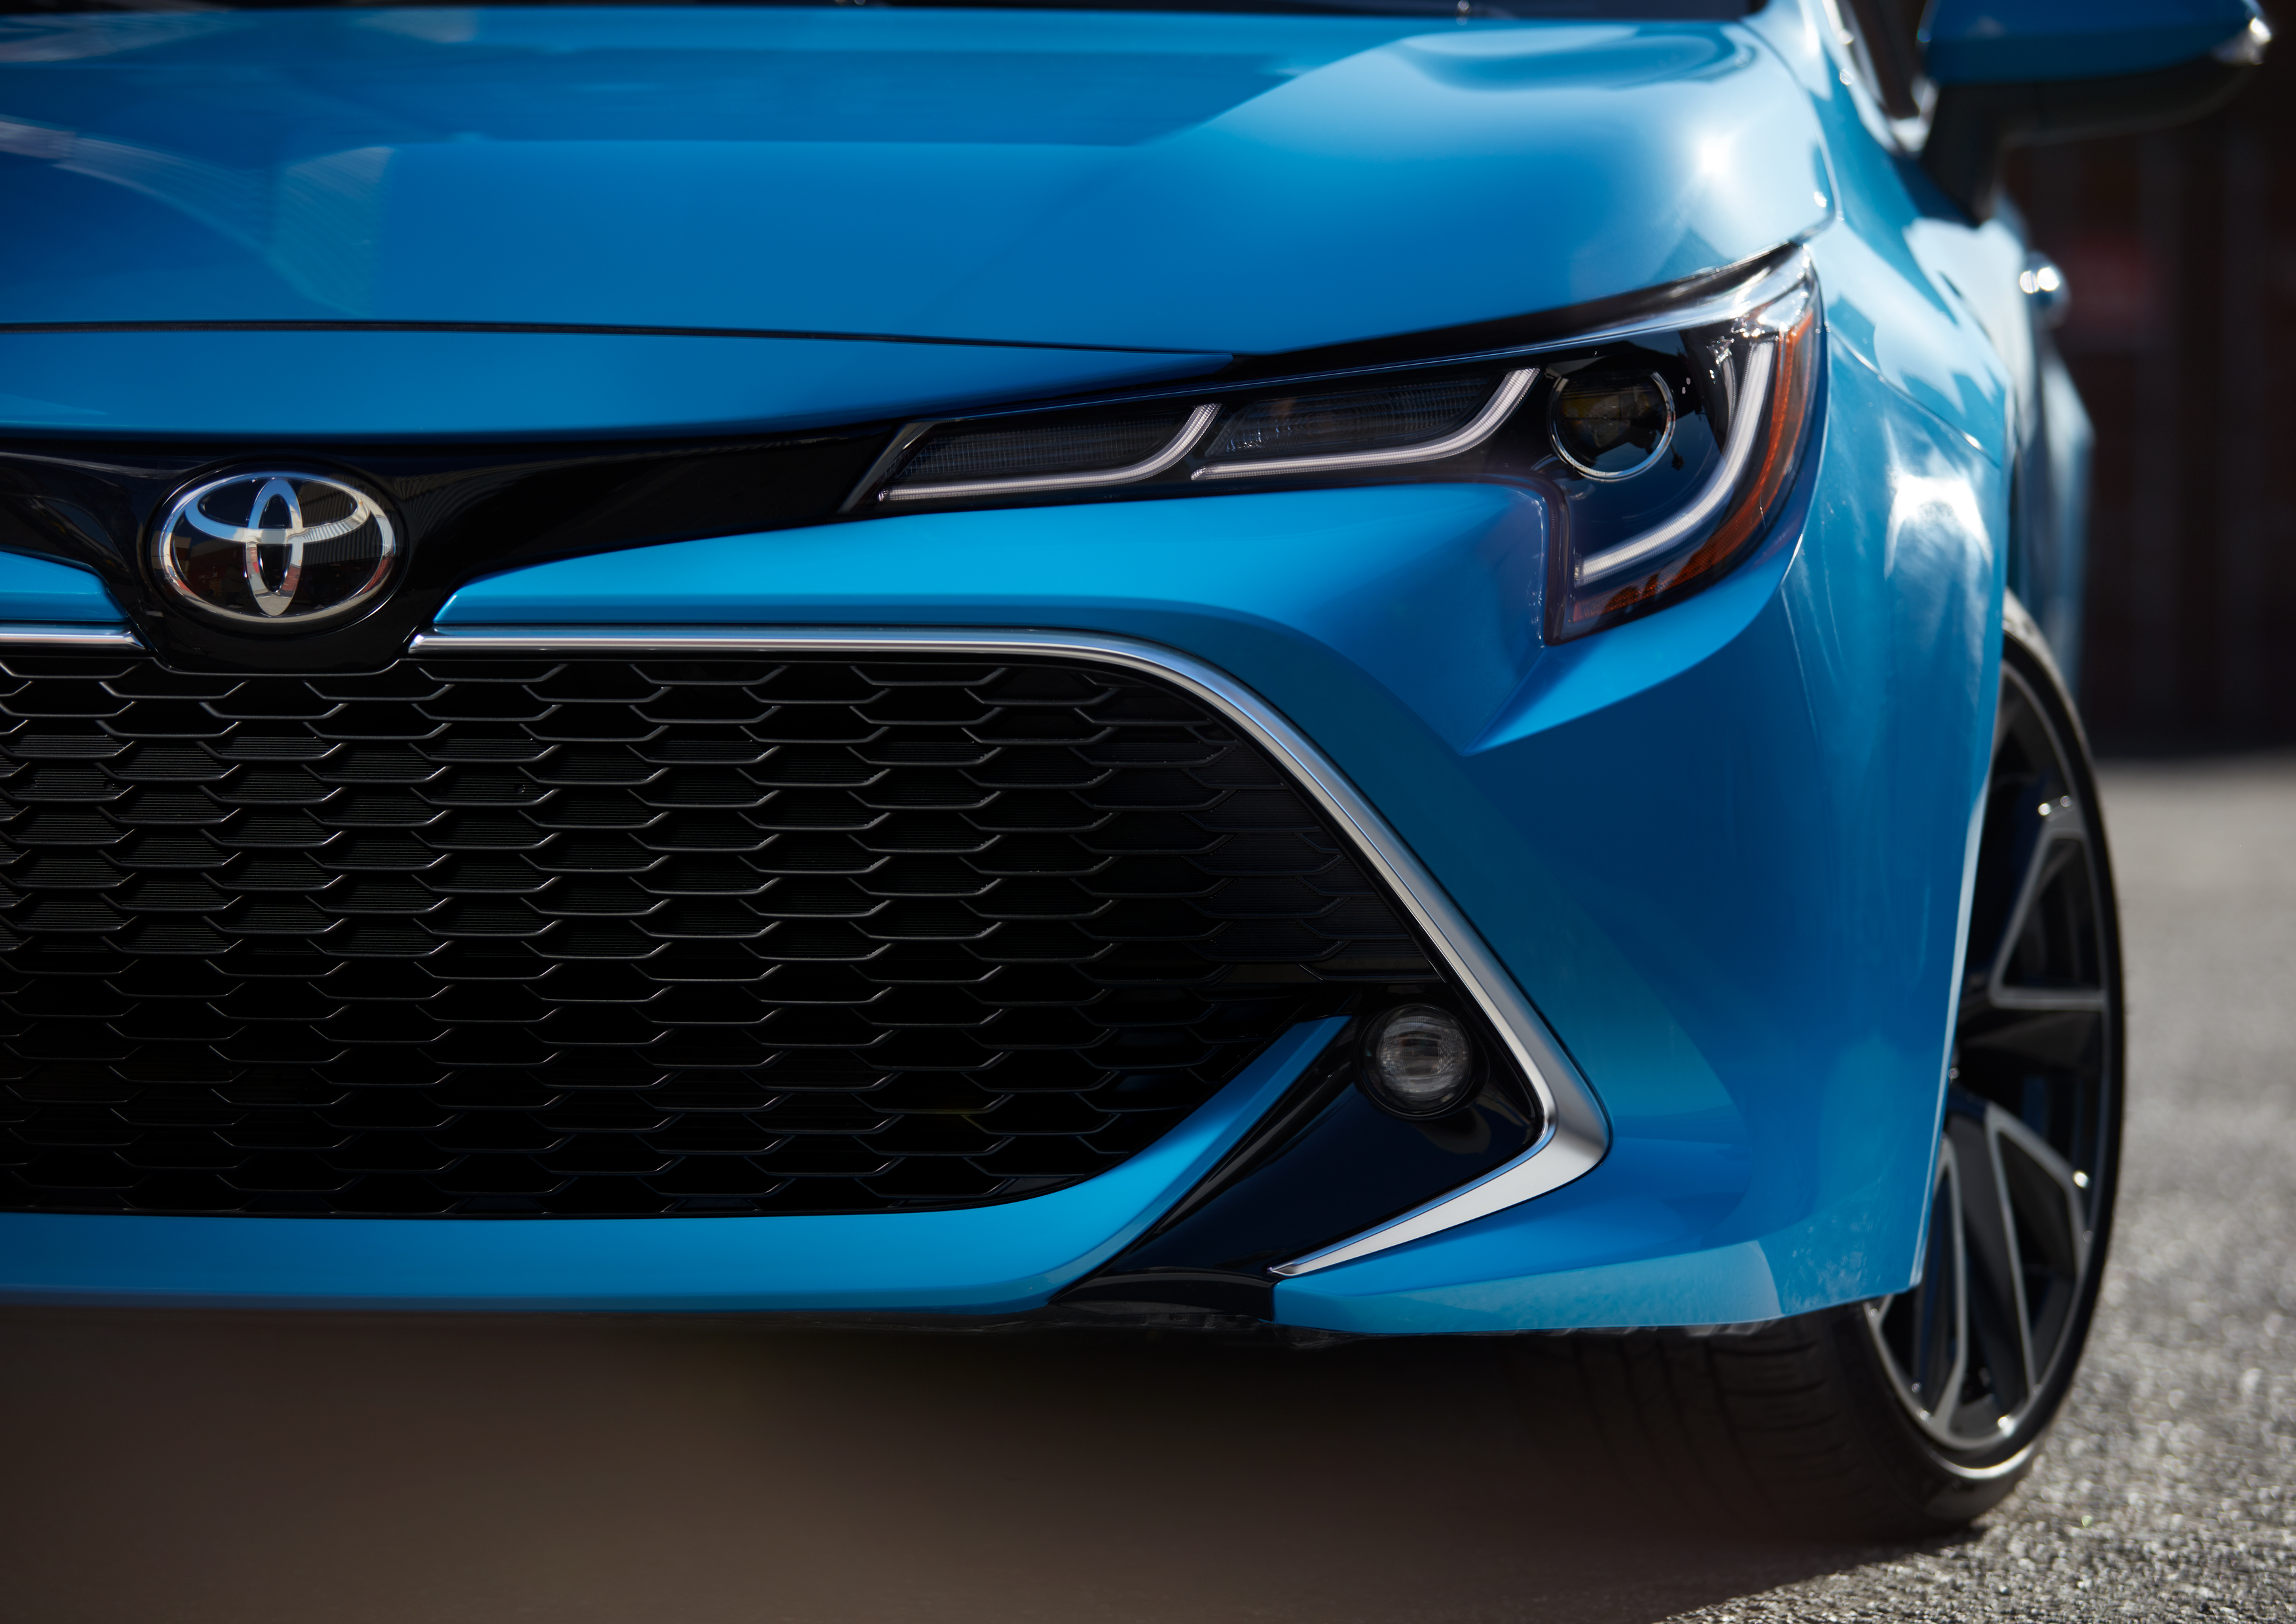 Toyota Corolla Hatchback accessories specifications